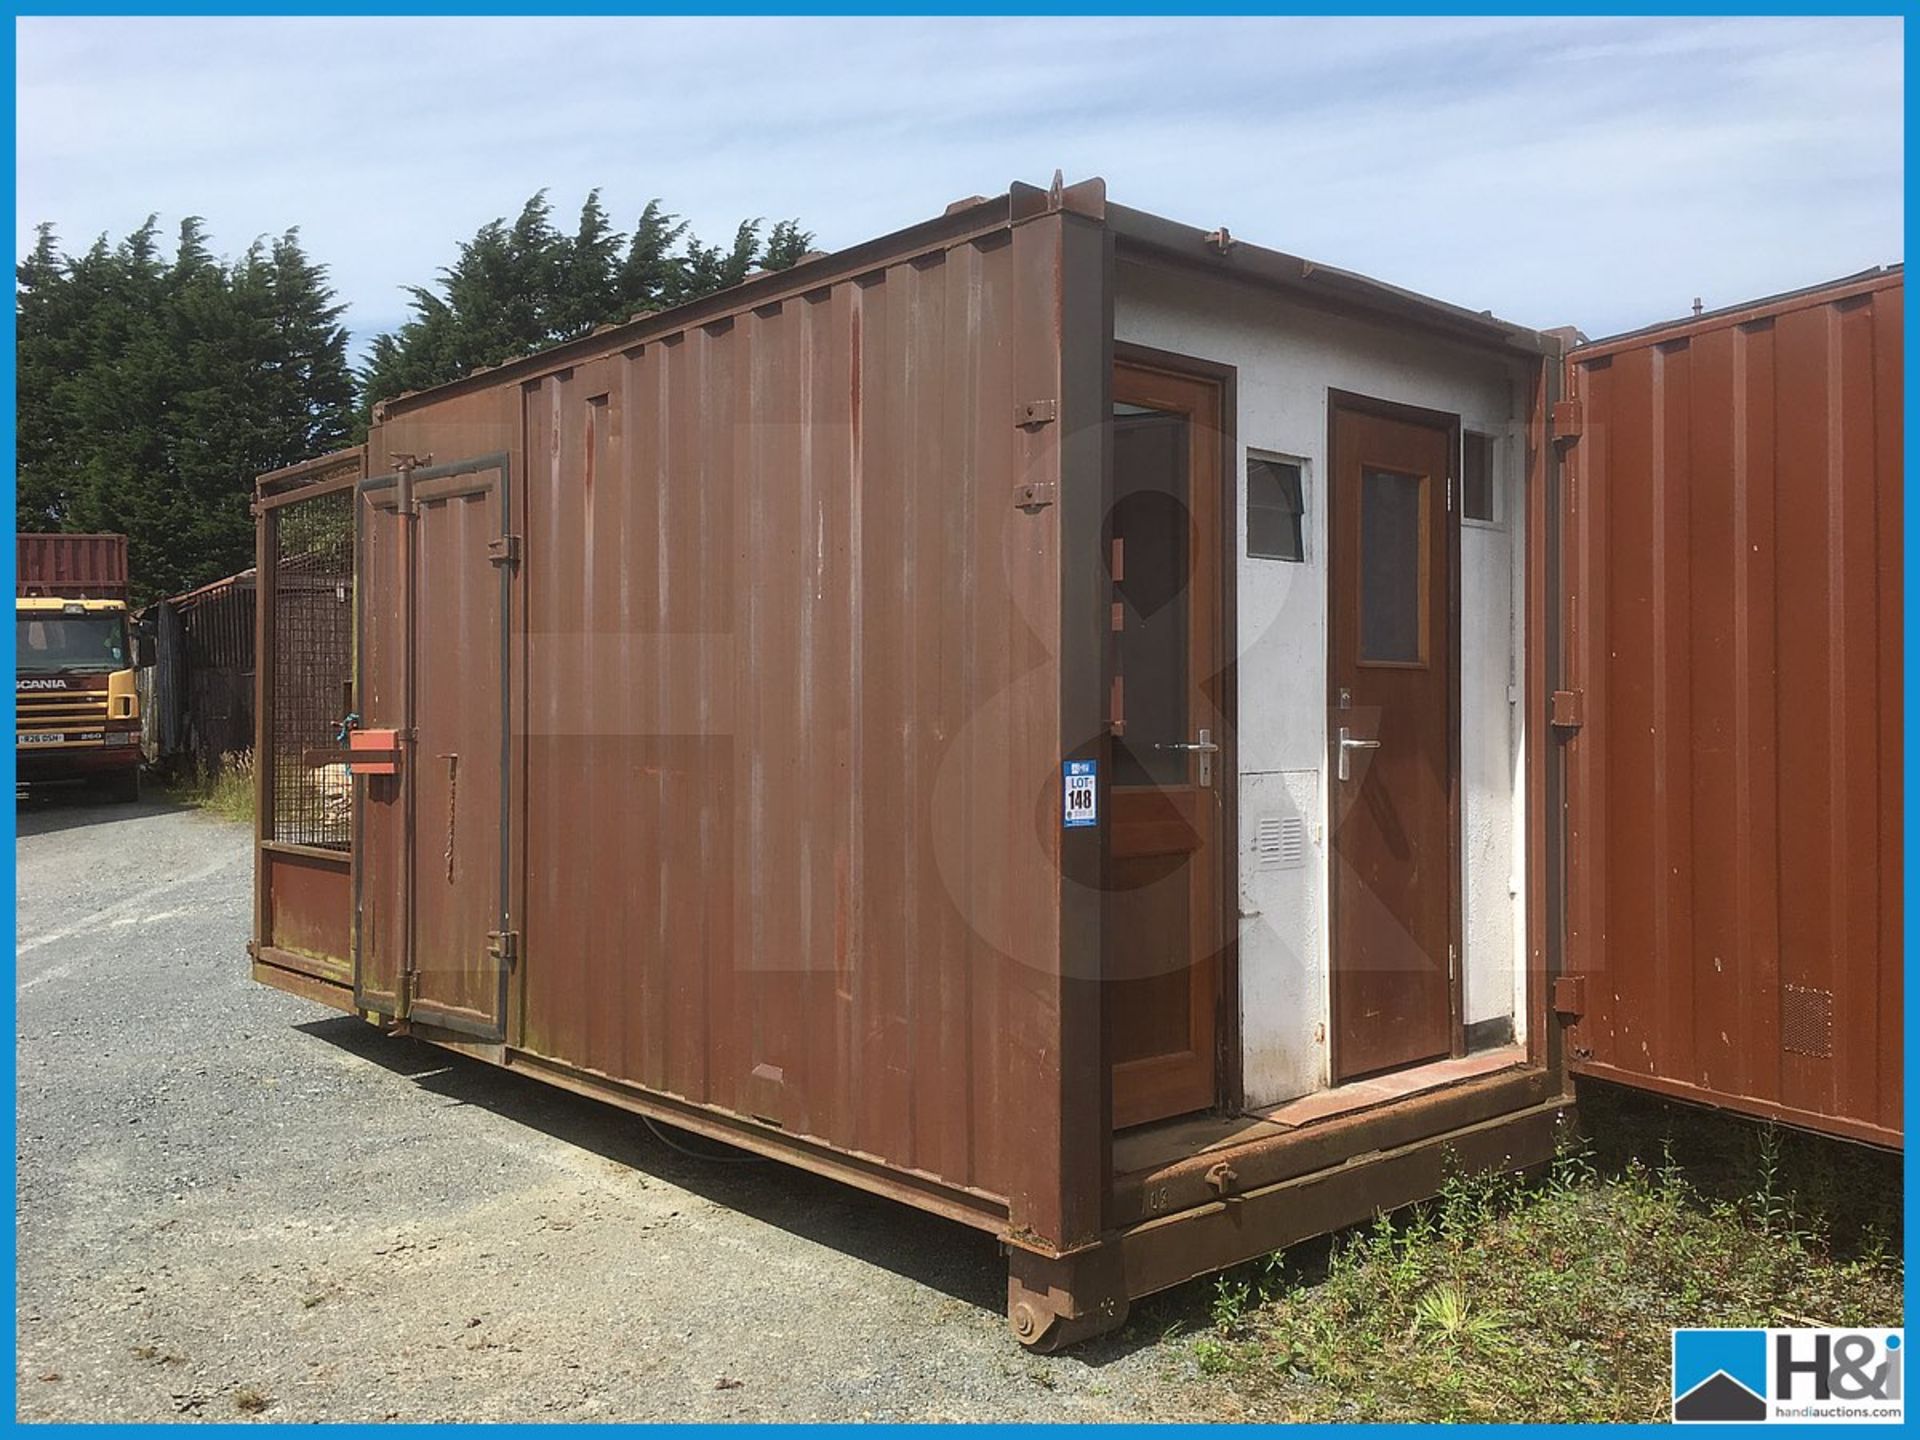 5m shipping container converted to site welfare cabin comprising secure storage area, canteen and